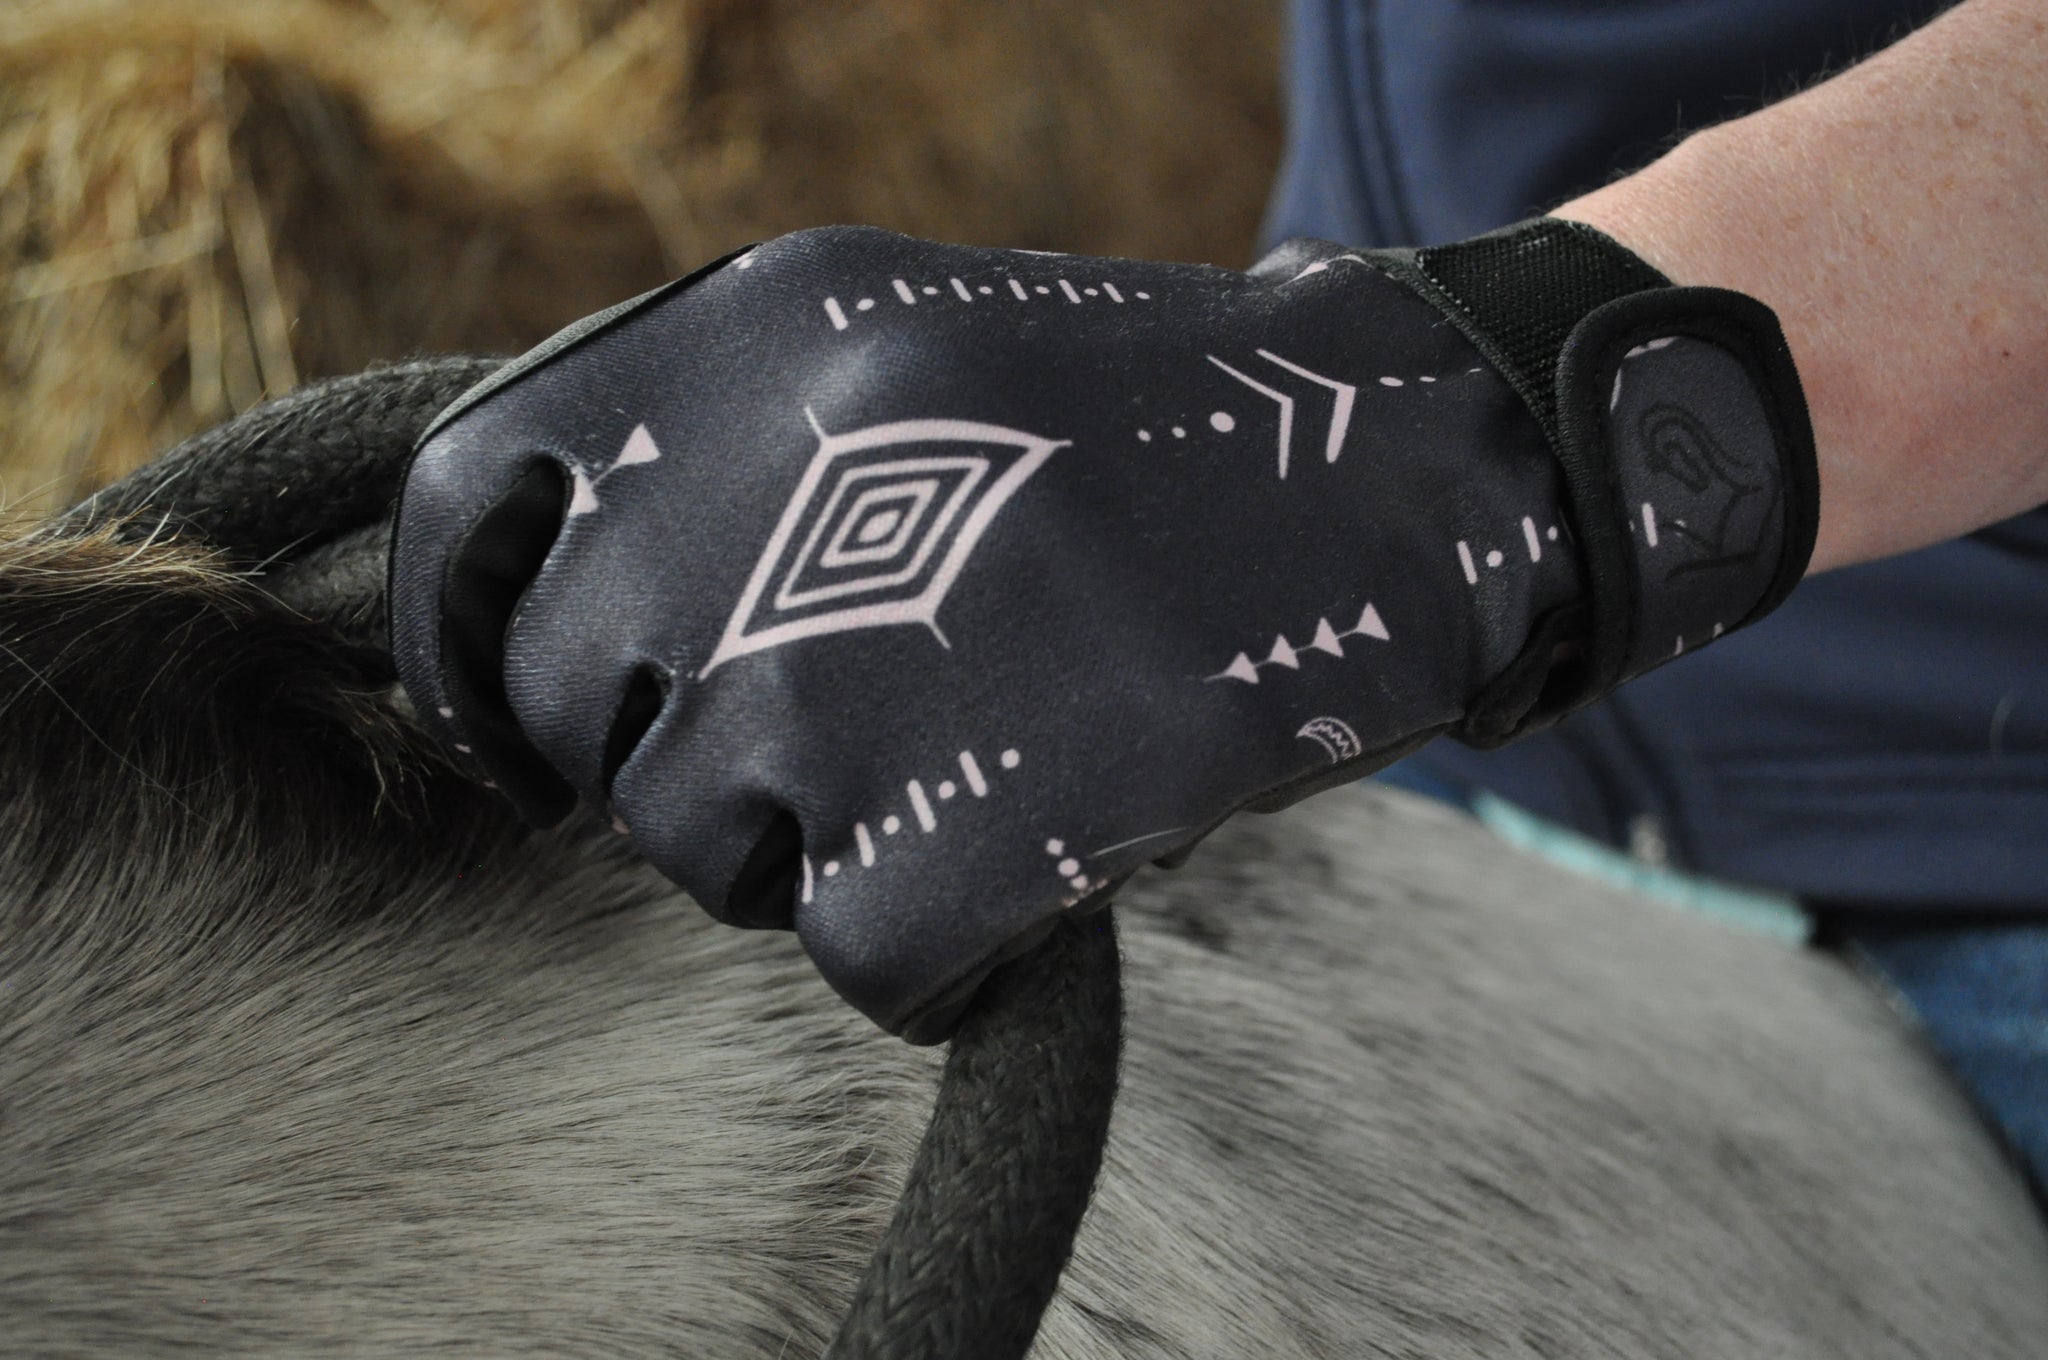 Black bull horse riding gloves with closed hand